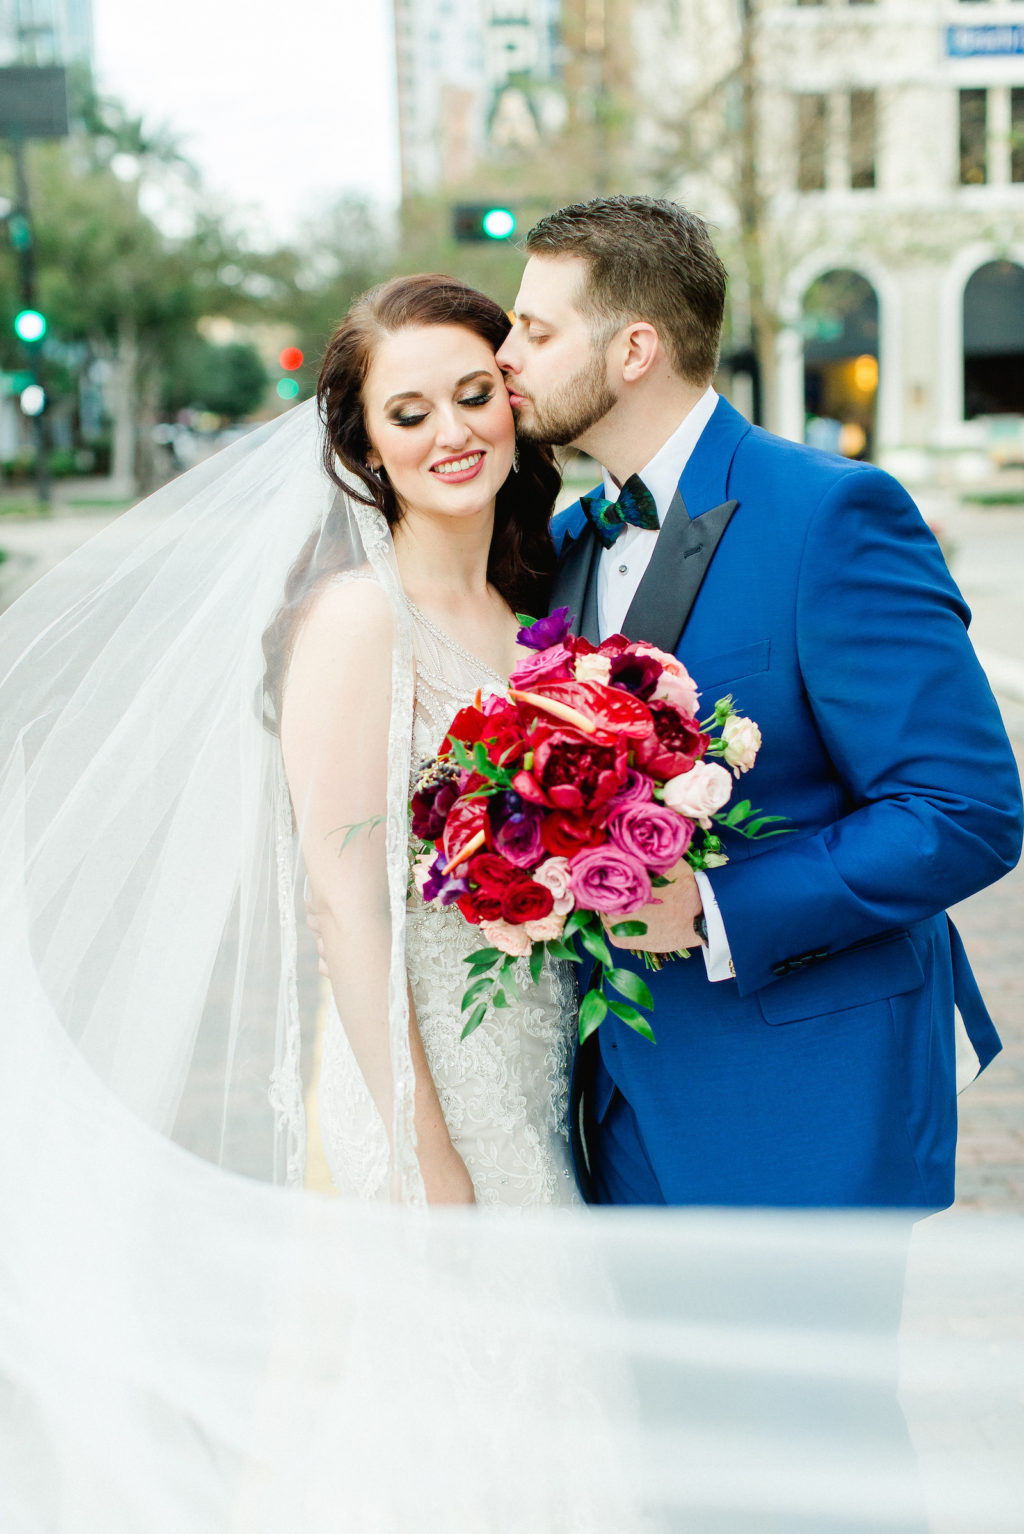 Bride and Groom Outdoor Downtown Tampa Wedding Portrait Veil Shot | Groom in Blue Suit with Black Satin Lapel | Rhinestone Embroidered Wedding Dress Bridal Gown | Bright Colorful Red and Pink Wedding Bridal Bouquet